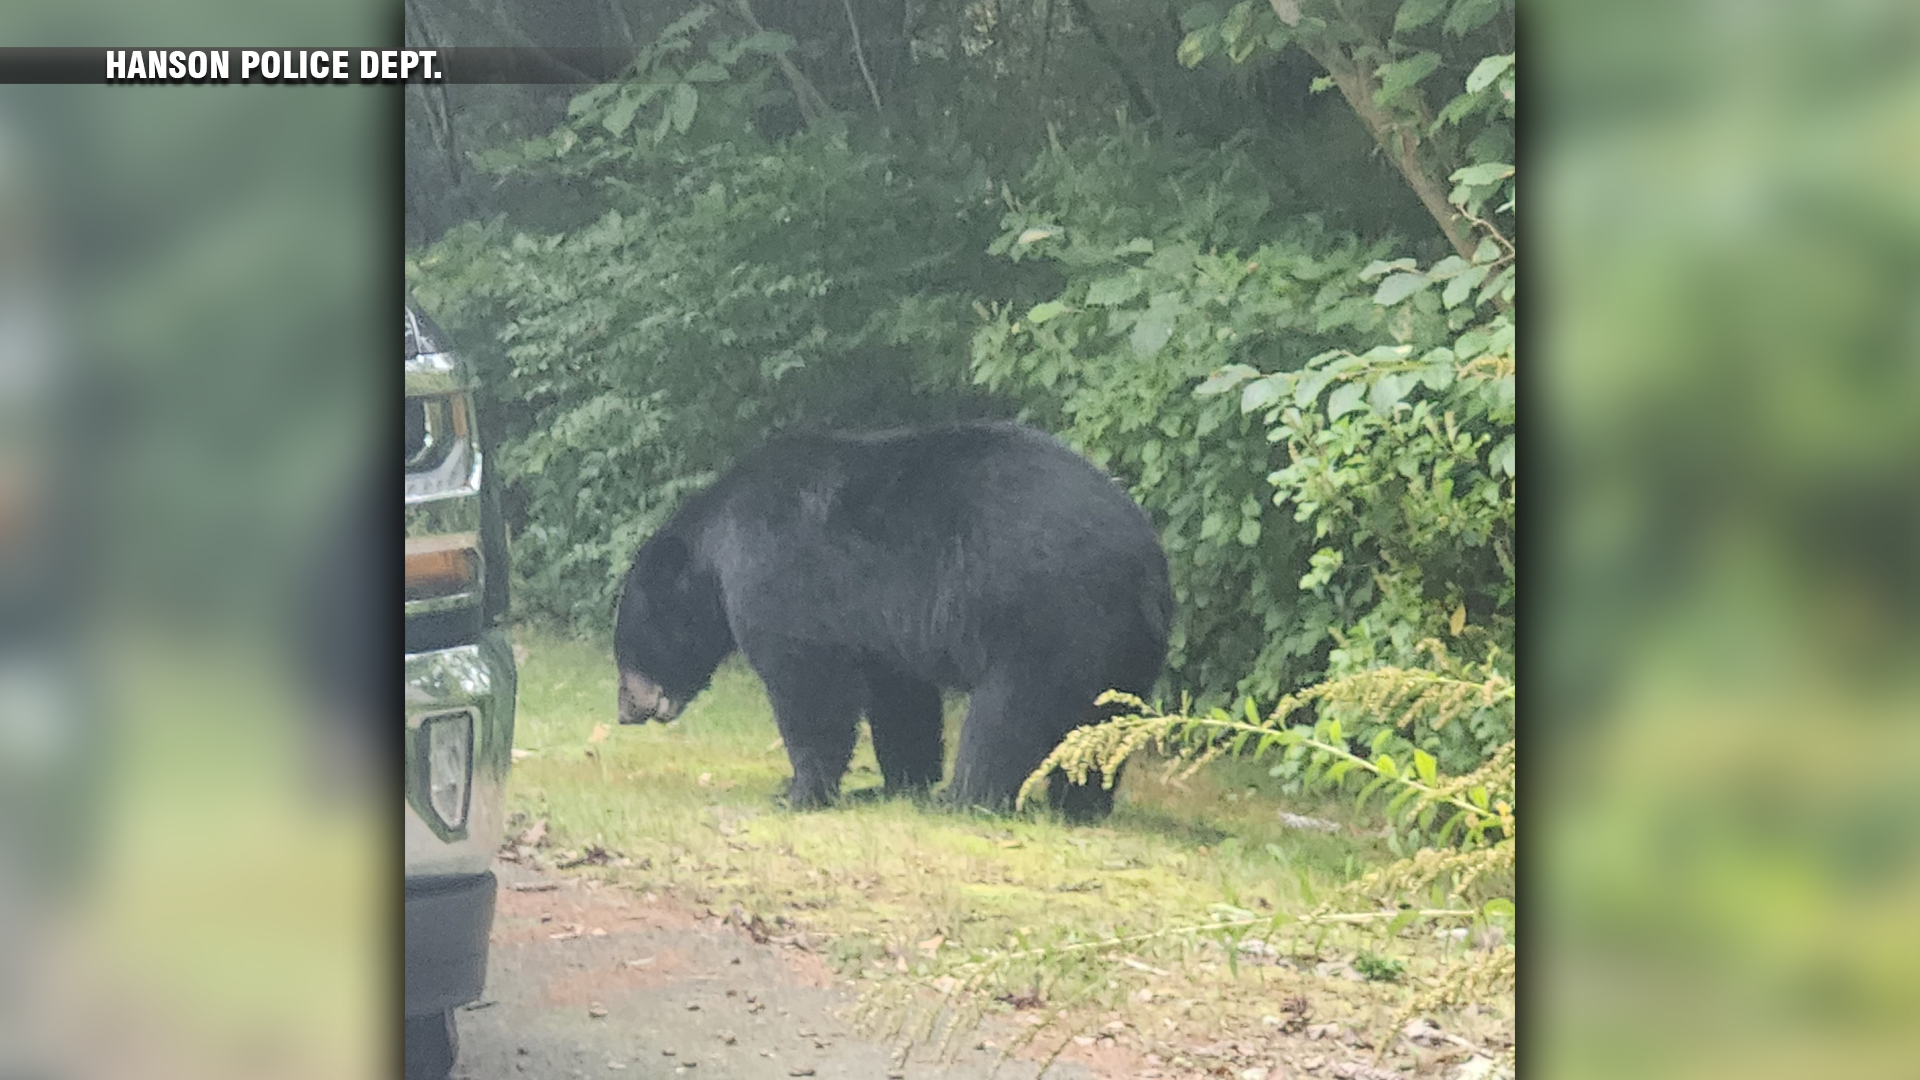 A Bear unfortunately had to be shot last night - livestock in